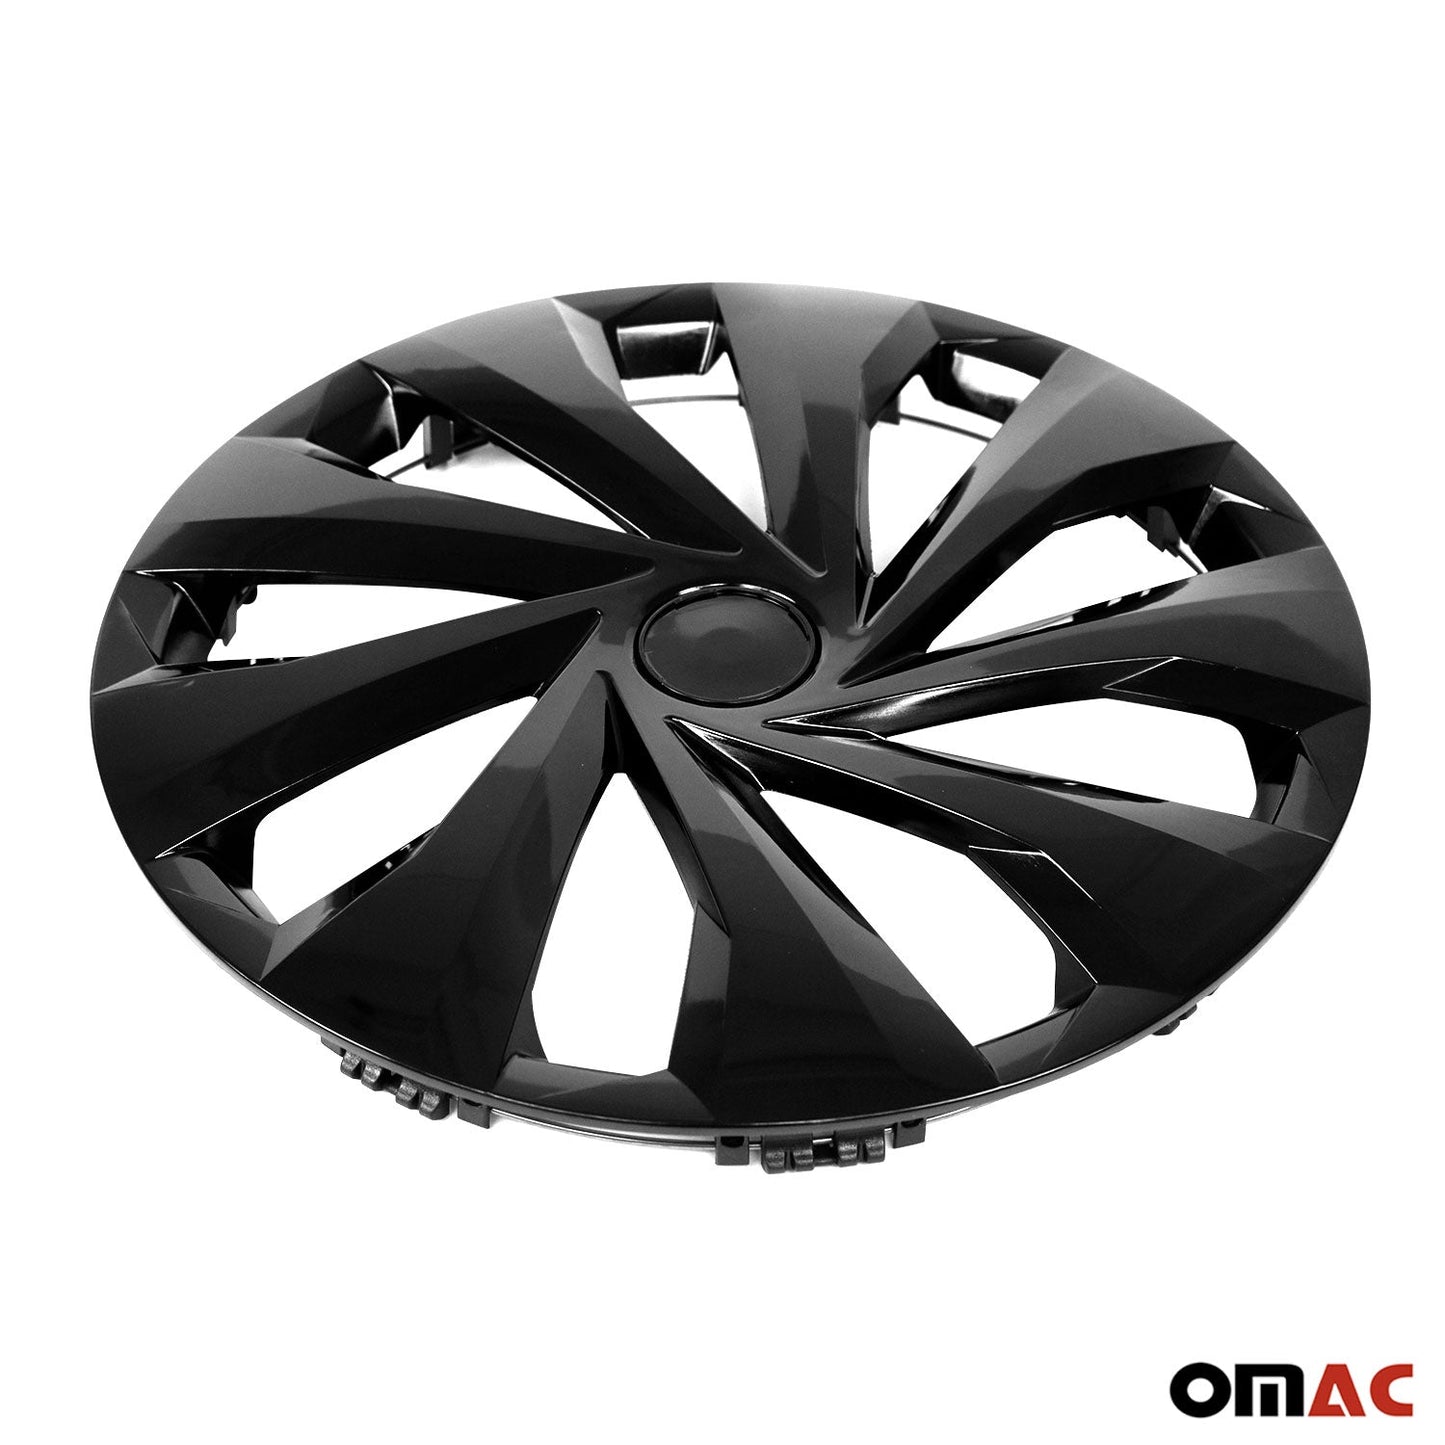 OMAC 15 Inch Wheel Rim Covers Hubcaps for Nissan Black Gloss G002469